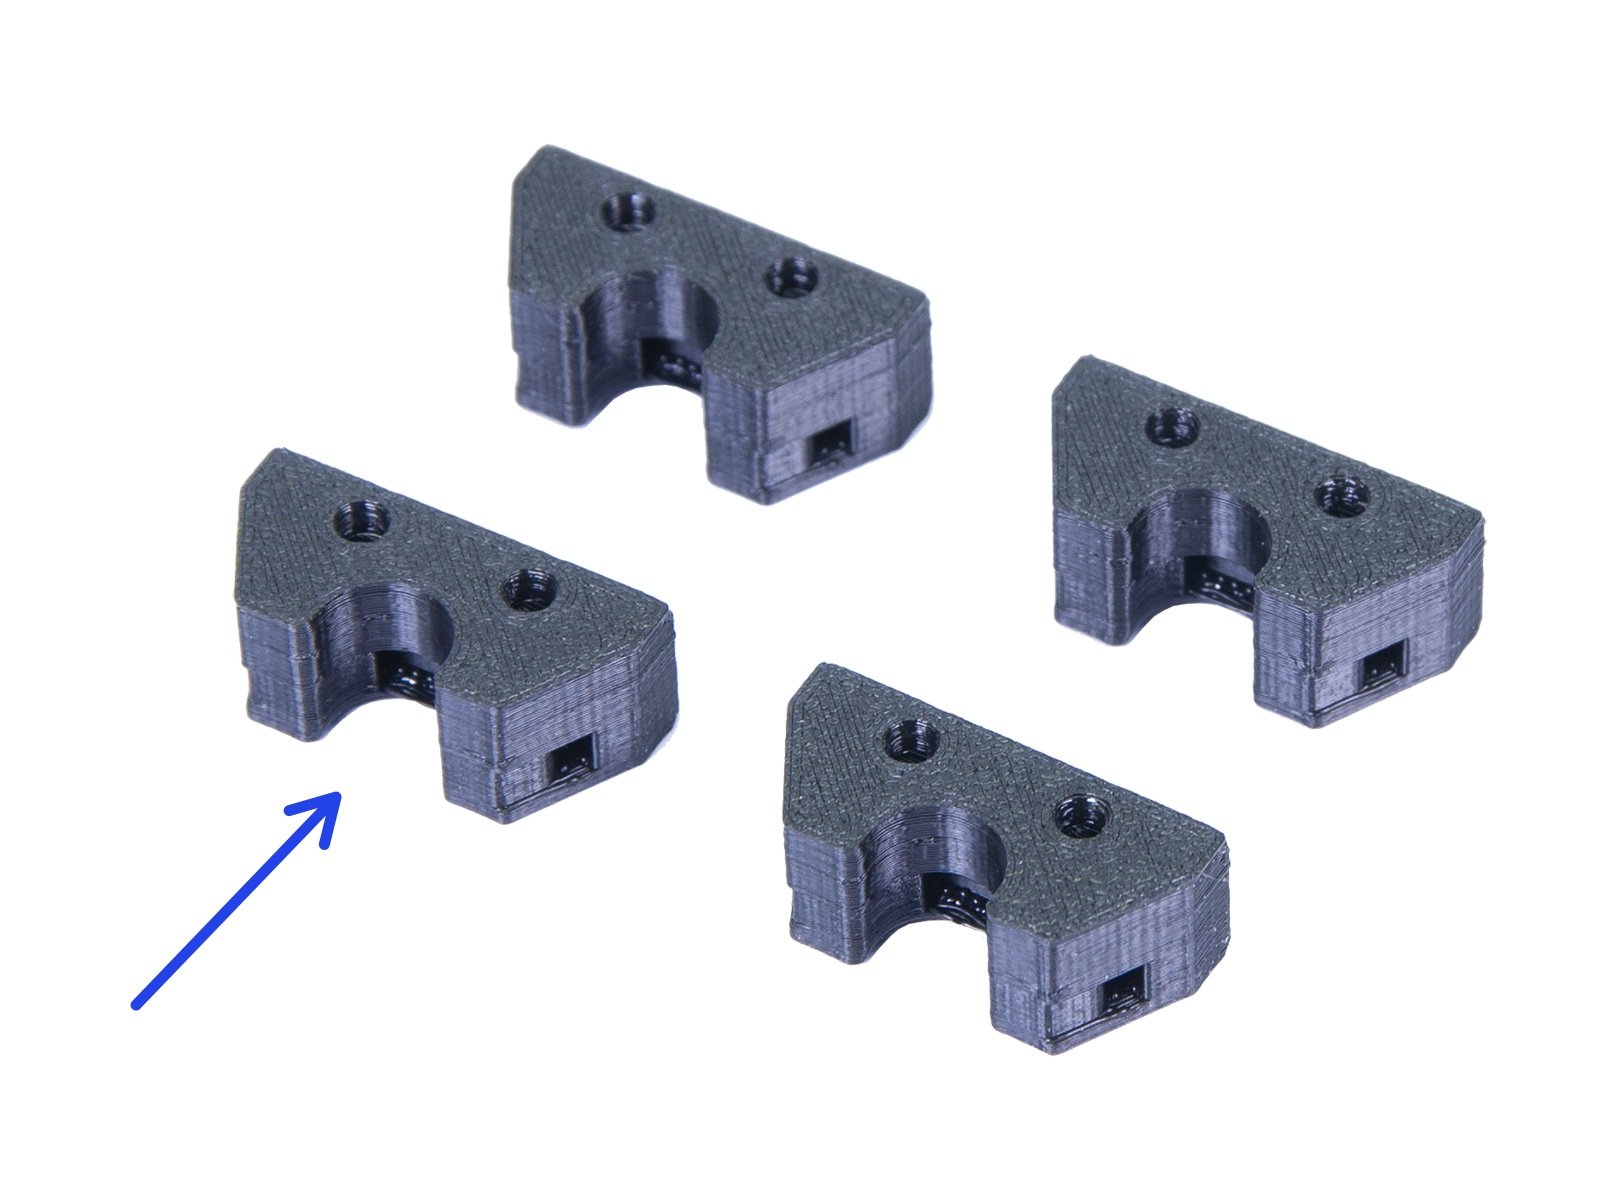 Y-axis: smooth rods holders